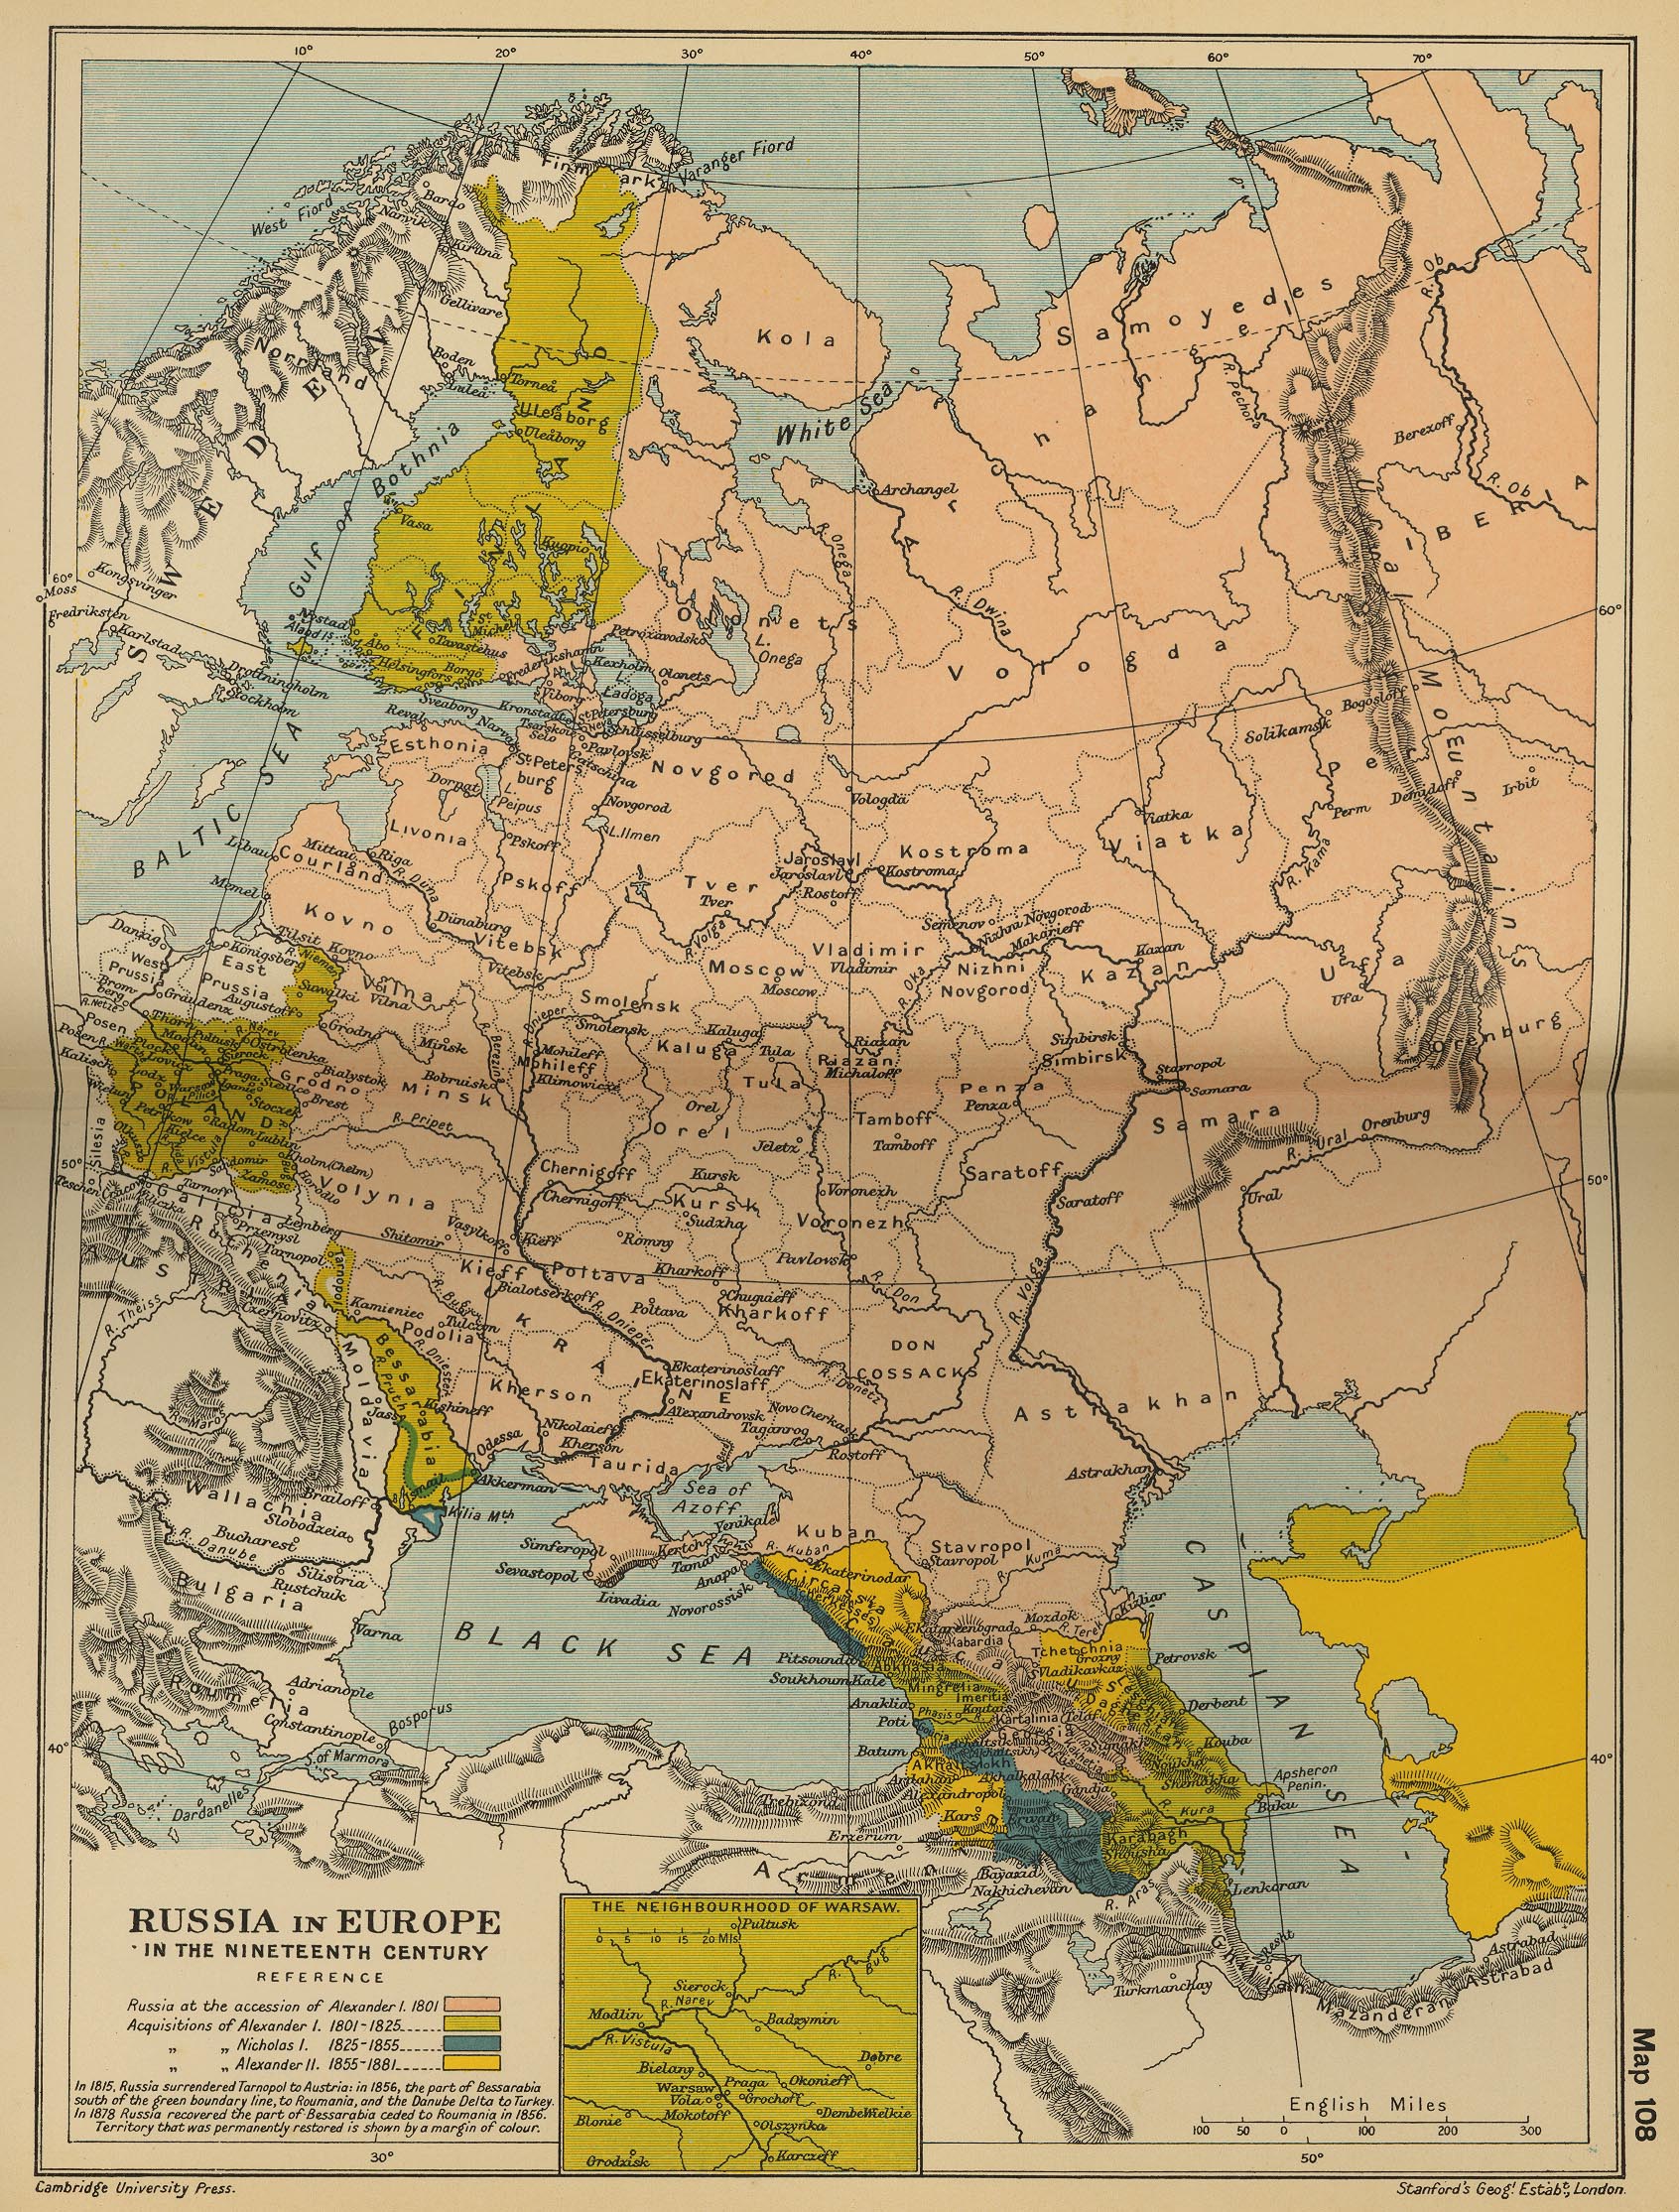 Russia in Europe in the 19th Century. Source: unknown.